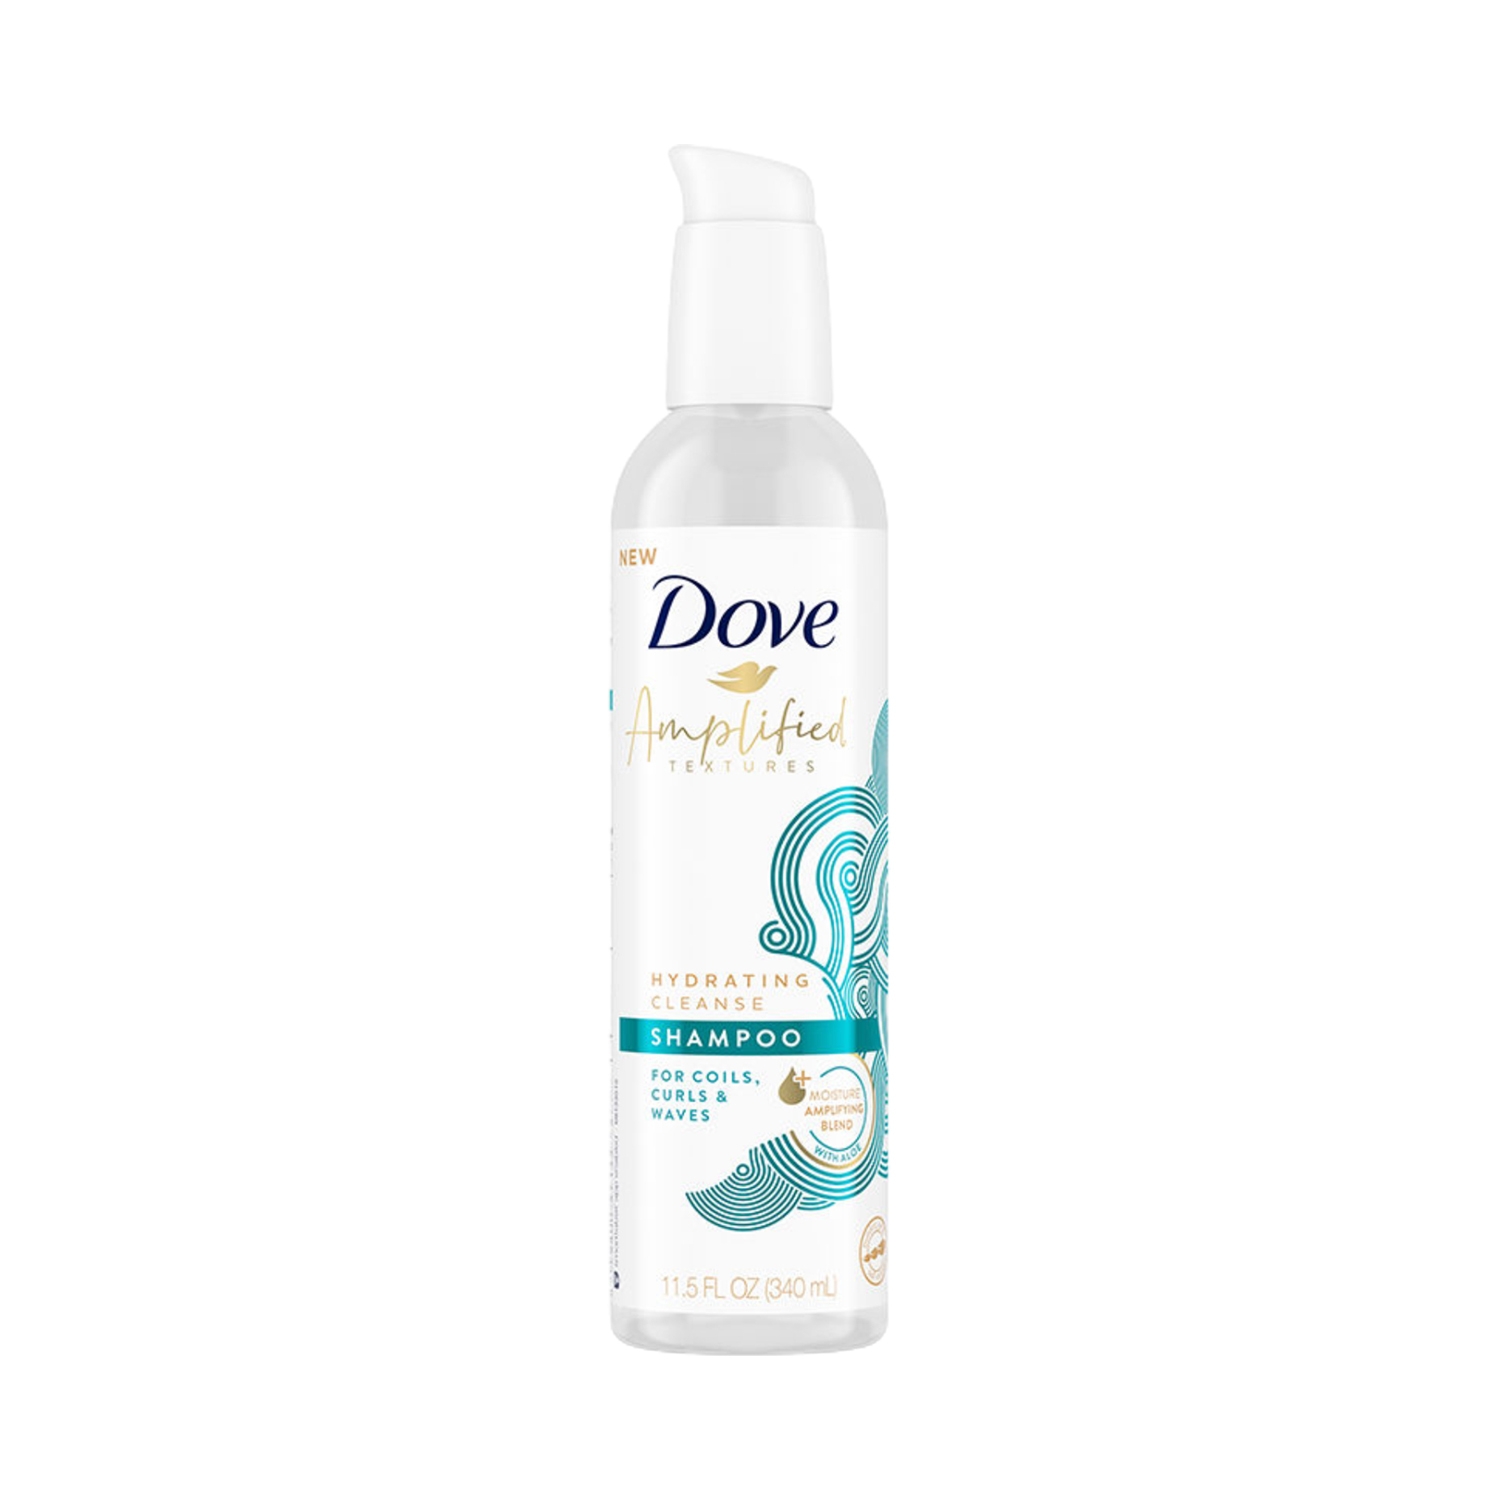 Dove | Dove Hydrating Cleanse Shampoo For Curly, Wavy And Coily Hair (340ml)